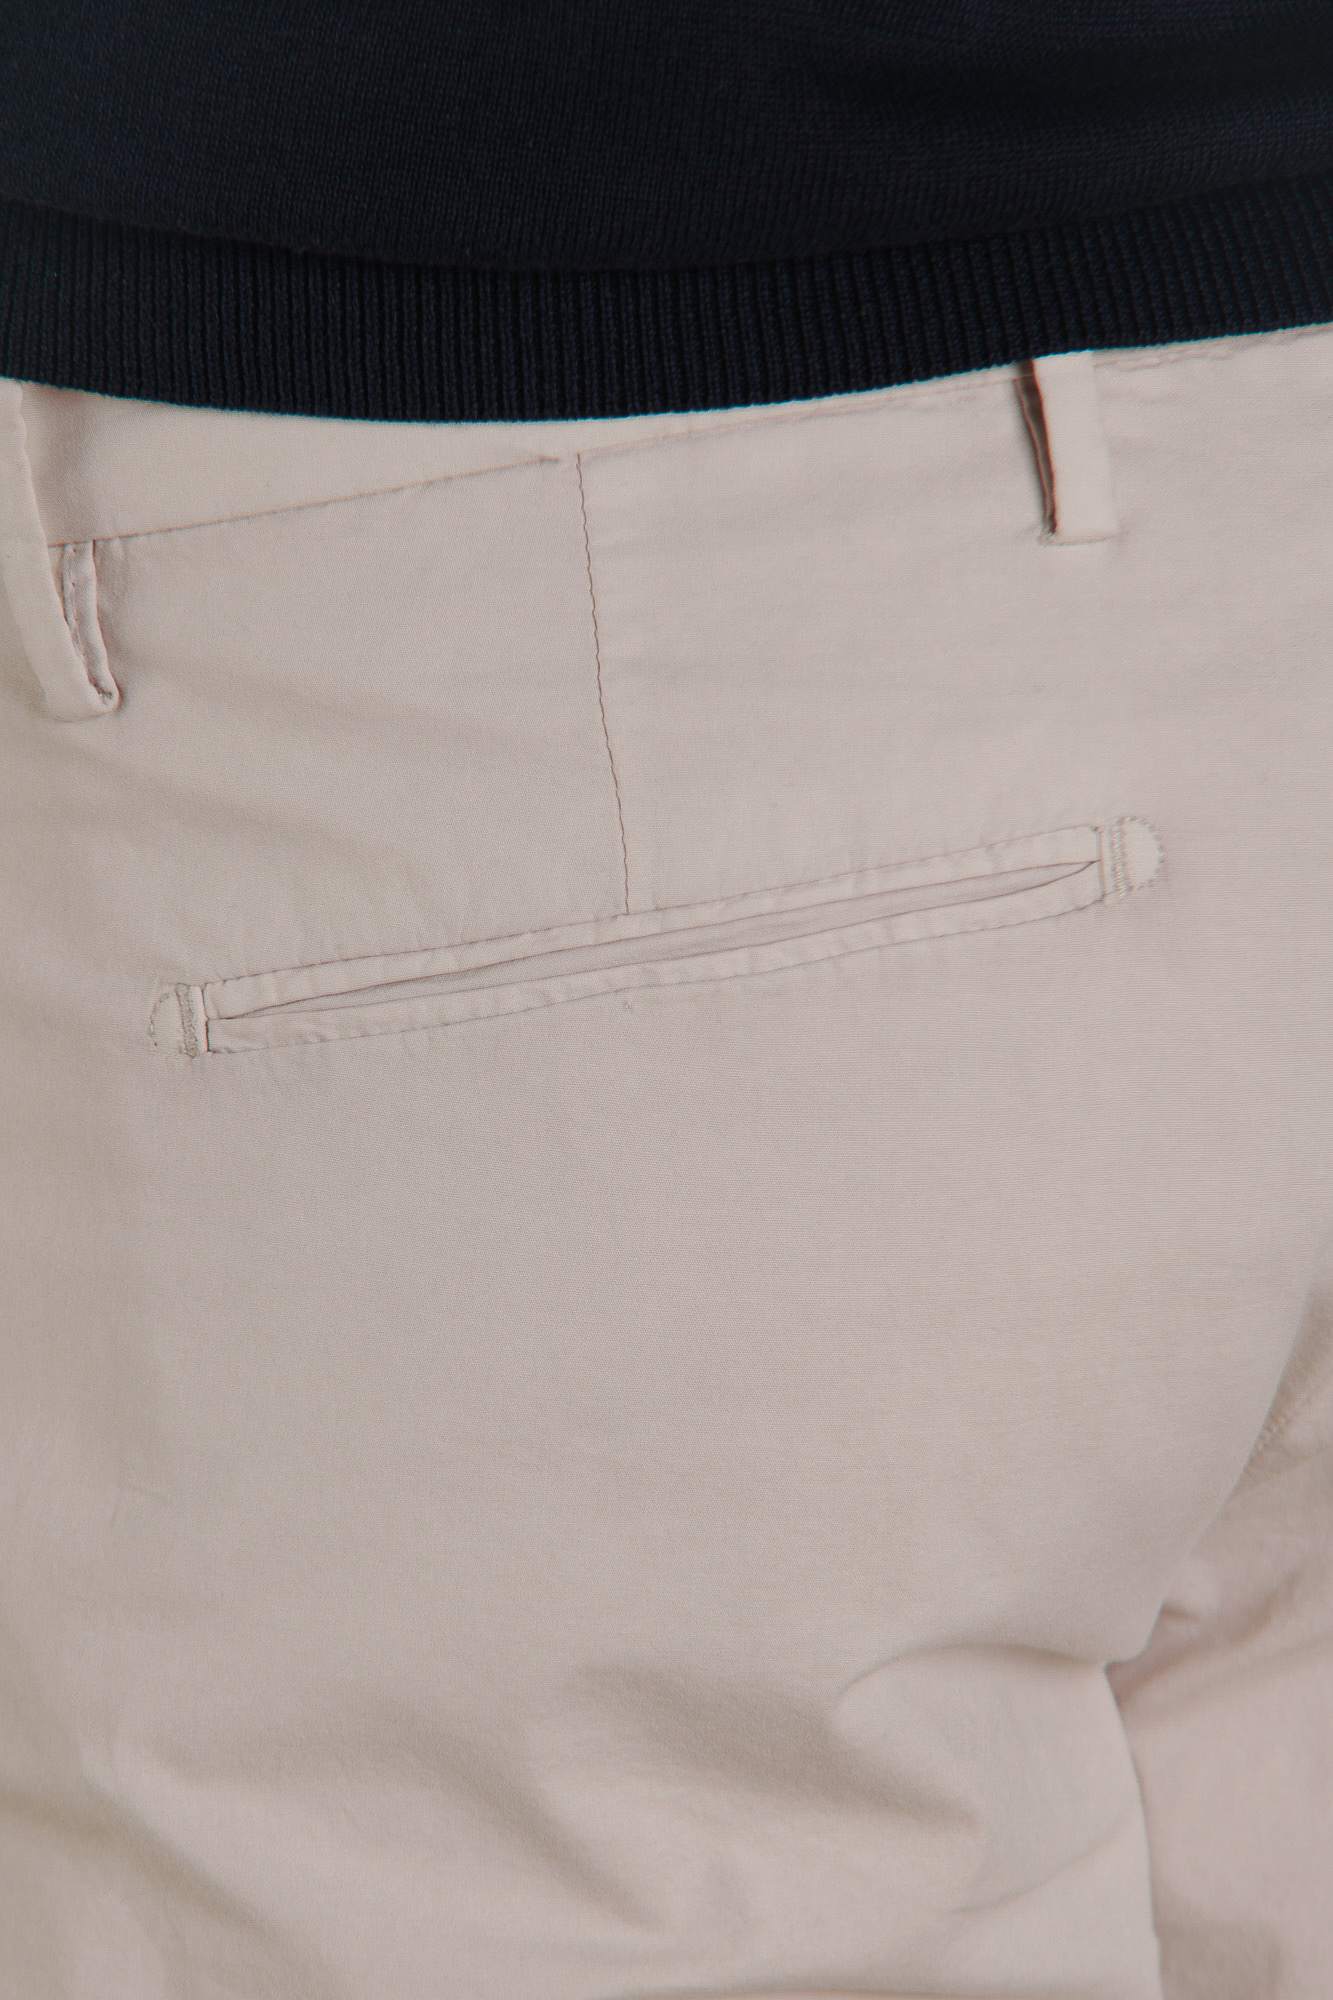 Pantalone chino in puro cotone image number null